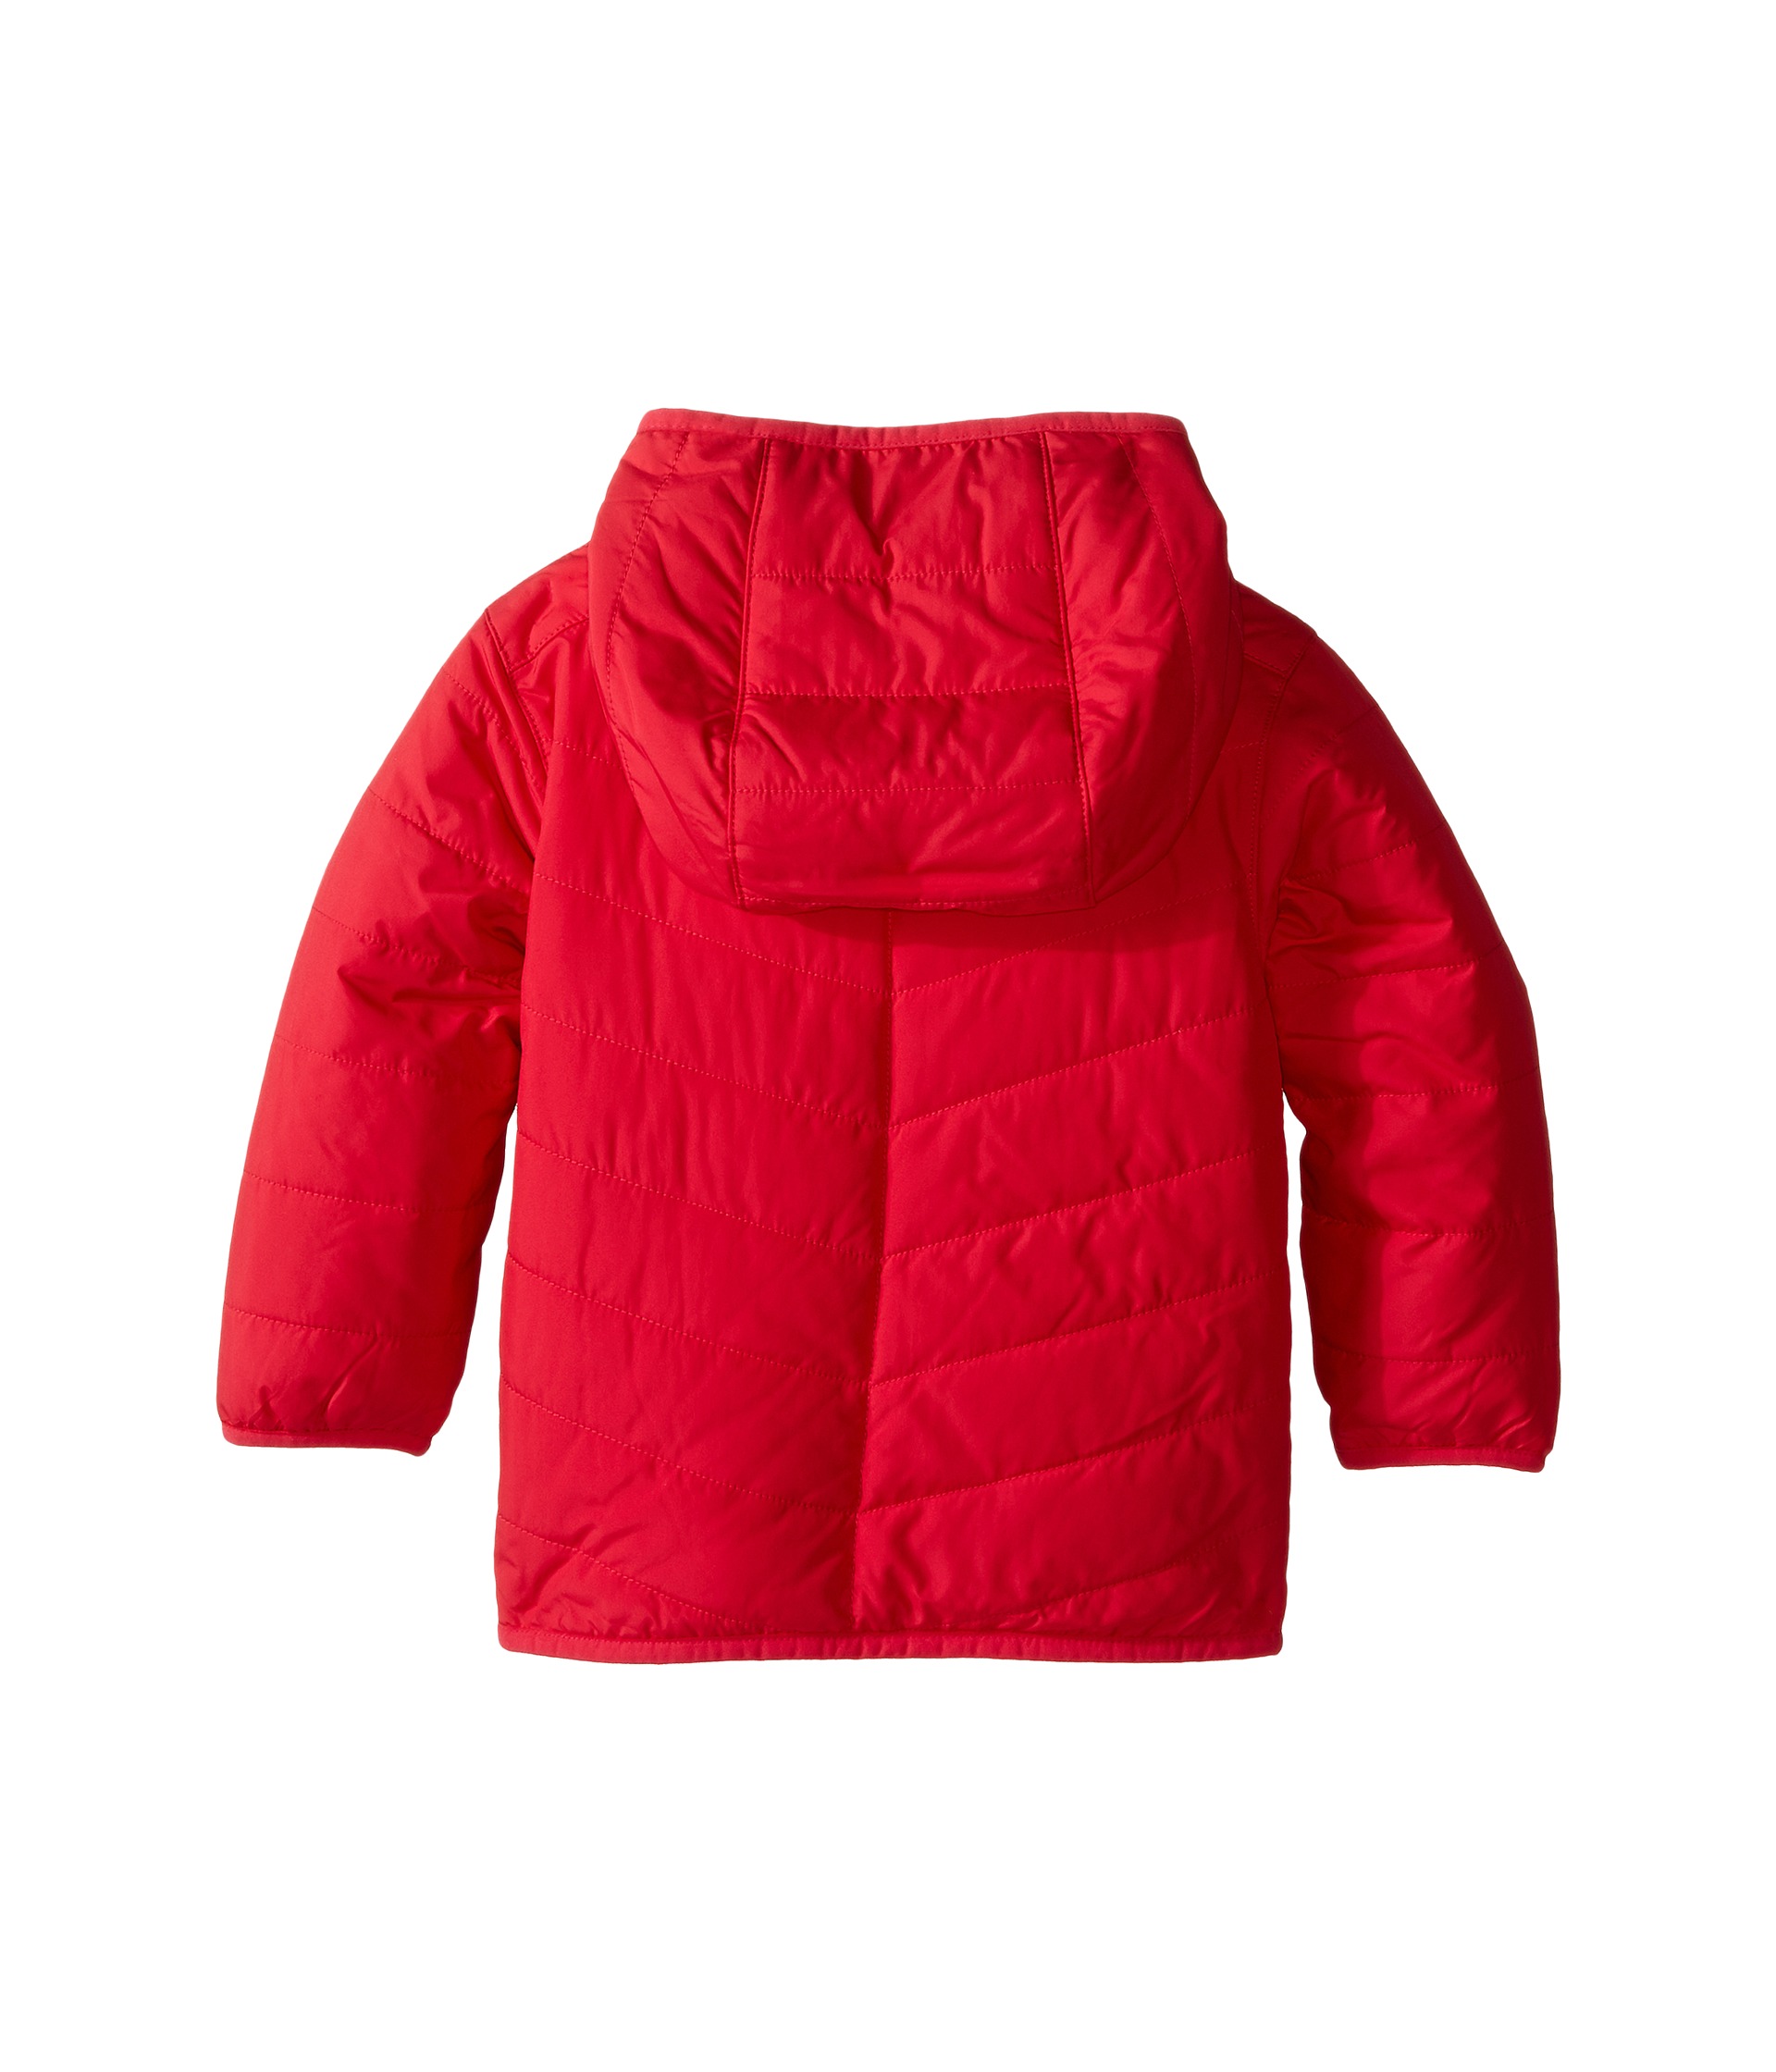 Columbia Kids Double Trouble™ Jacket (Infant) at Zappos.com